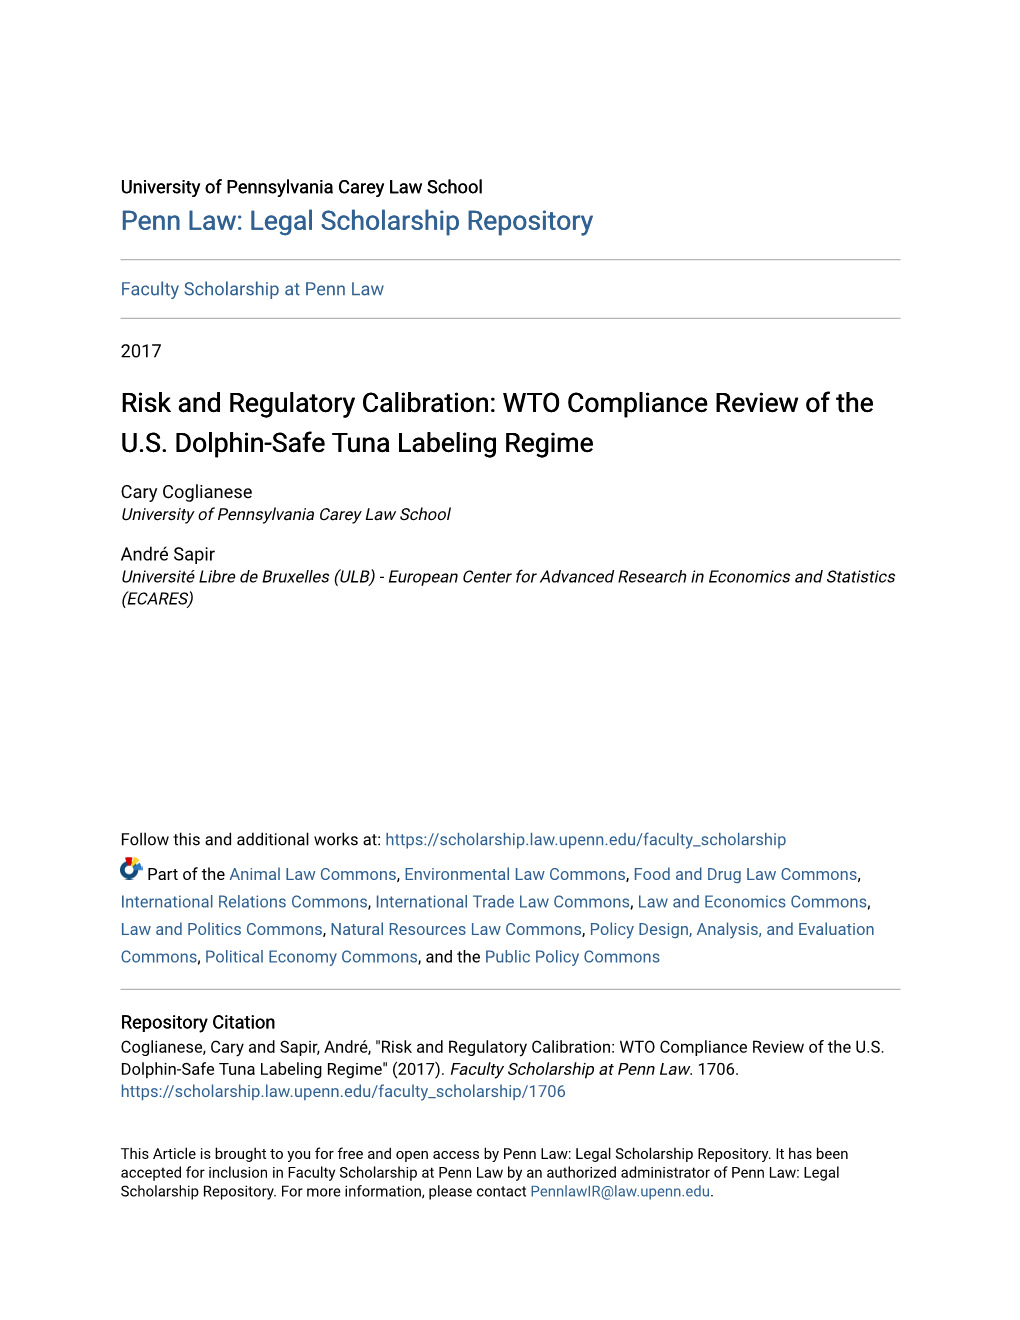 WTO Compliance Review of the US Dolphin-Safe Tuna Labeling Regime